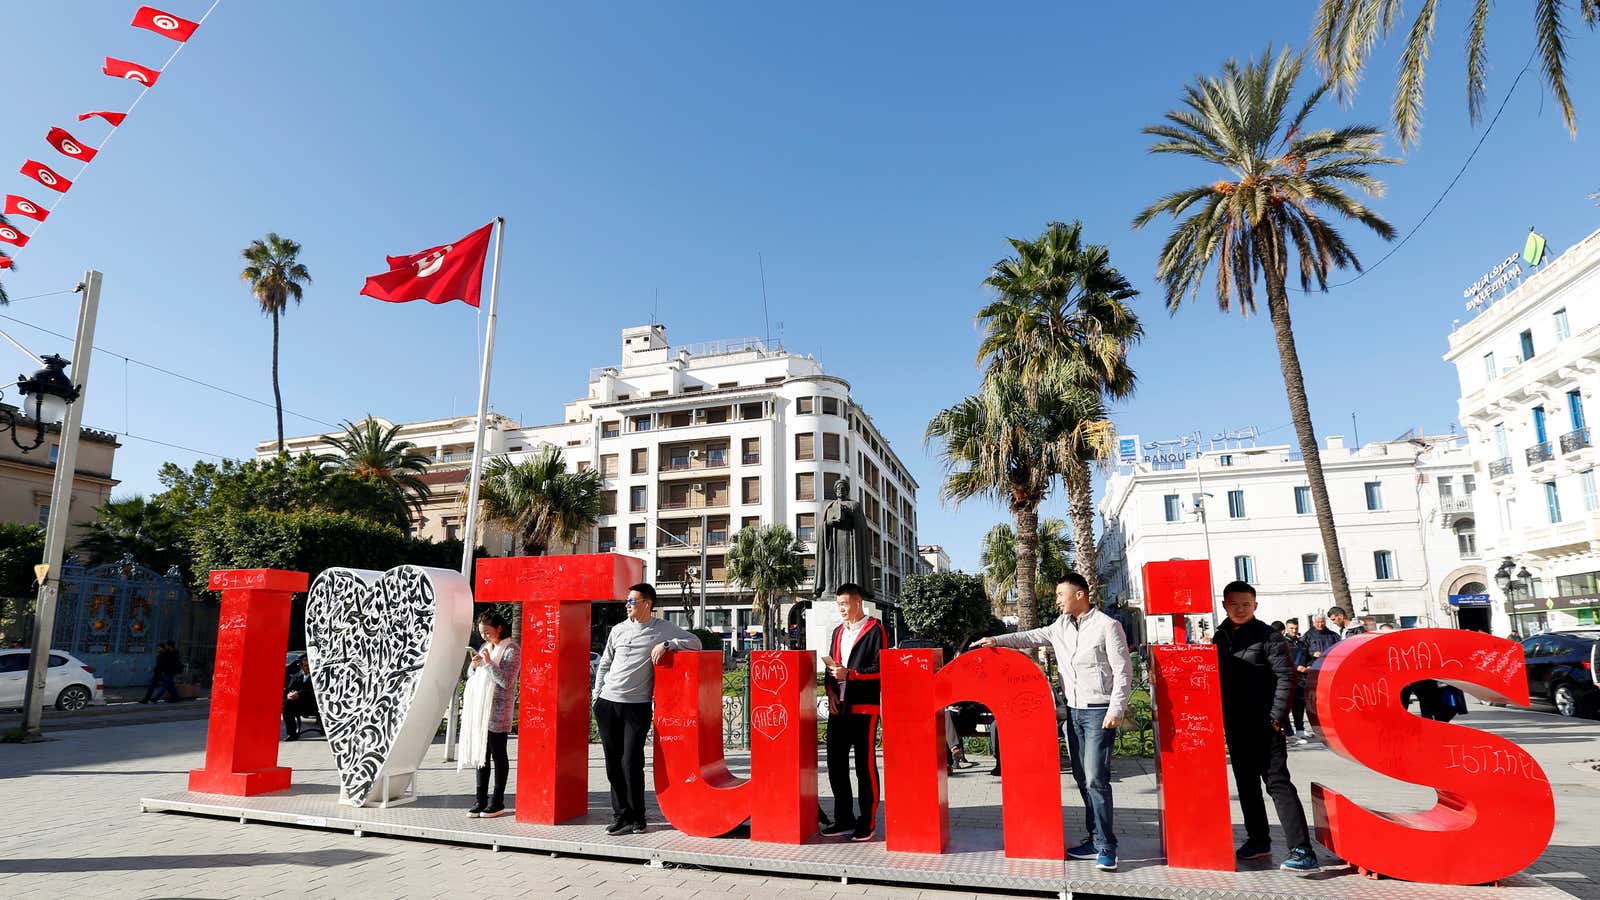 Startups might love Tunis soon too.